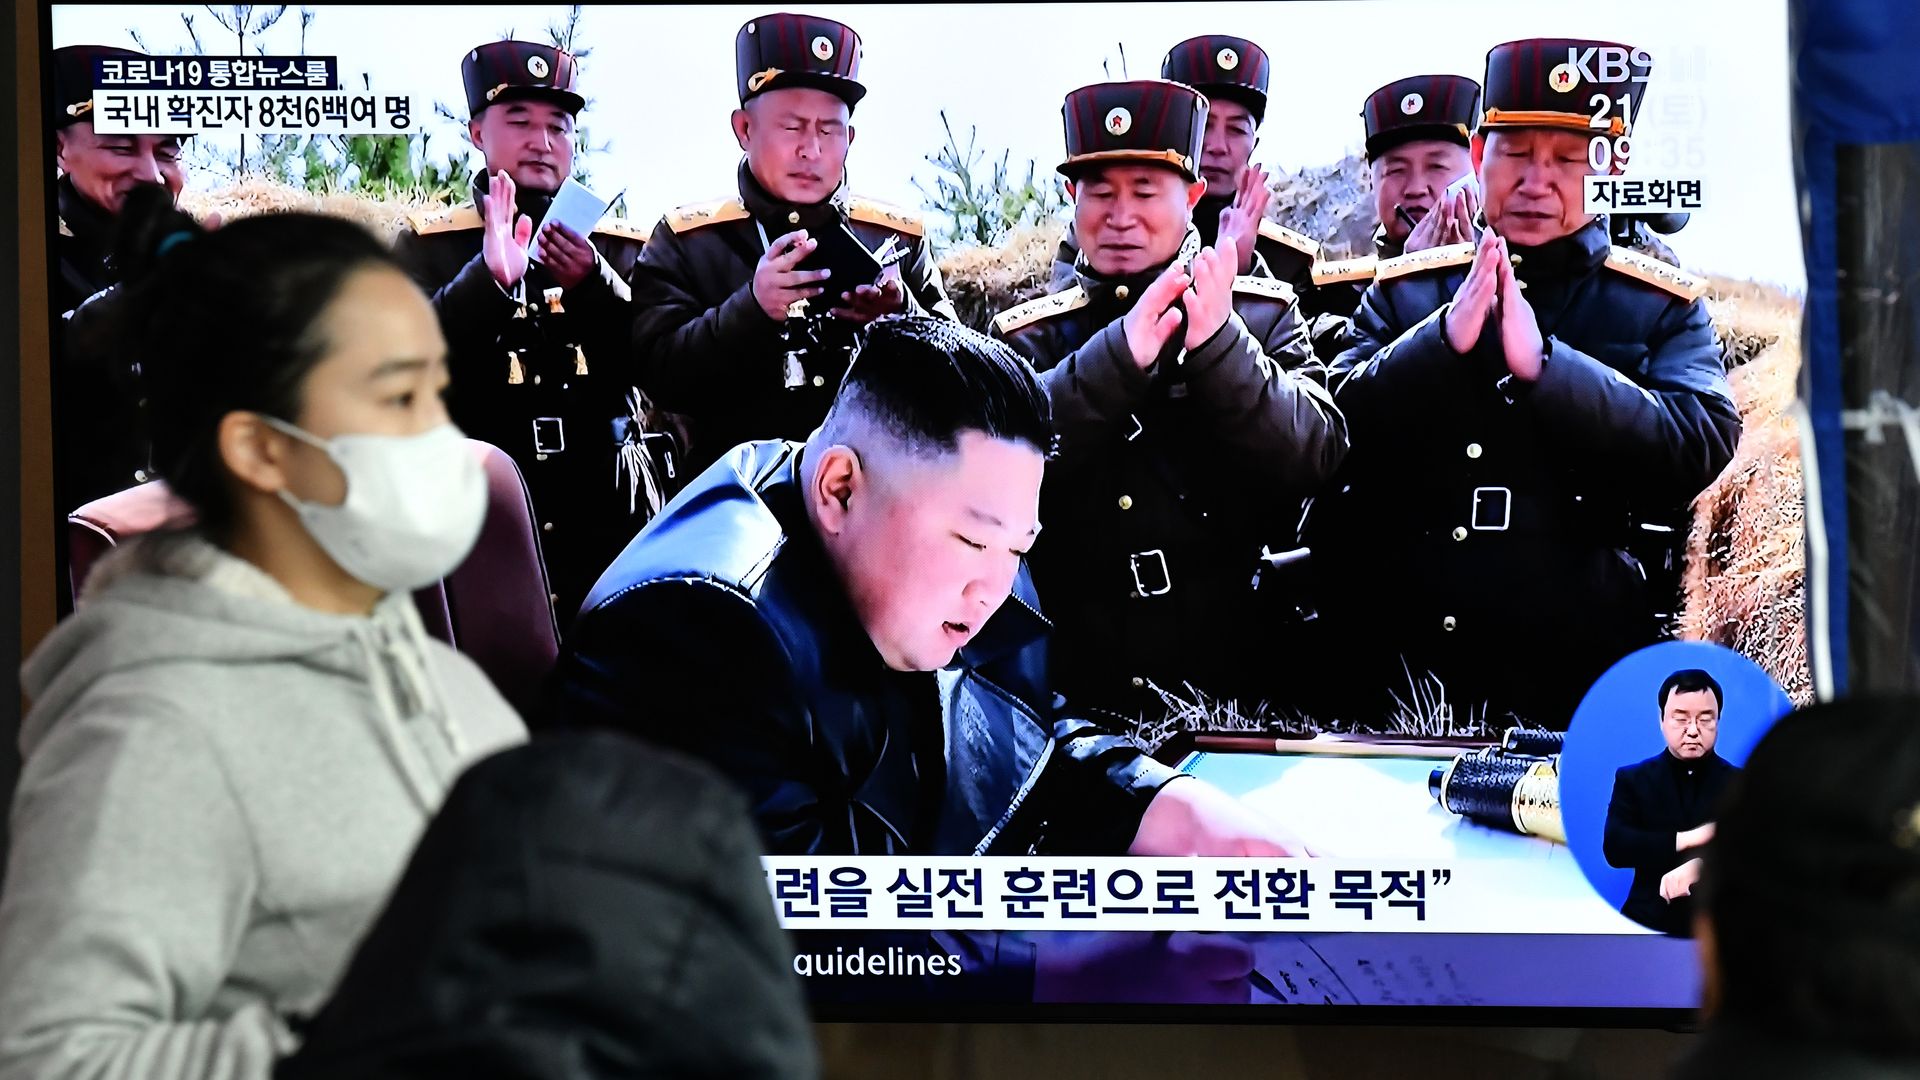  A woman wearing a face mask walks past a television news screen showing a file image of North Korean leader Kim Jong Un, at a railway station in Seoul on March 21